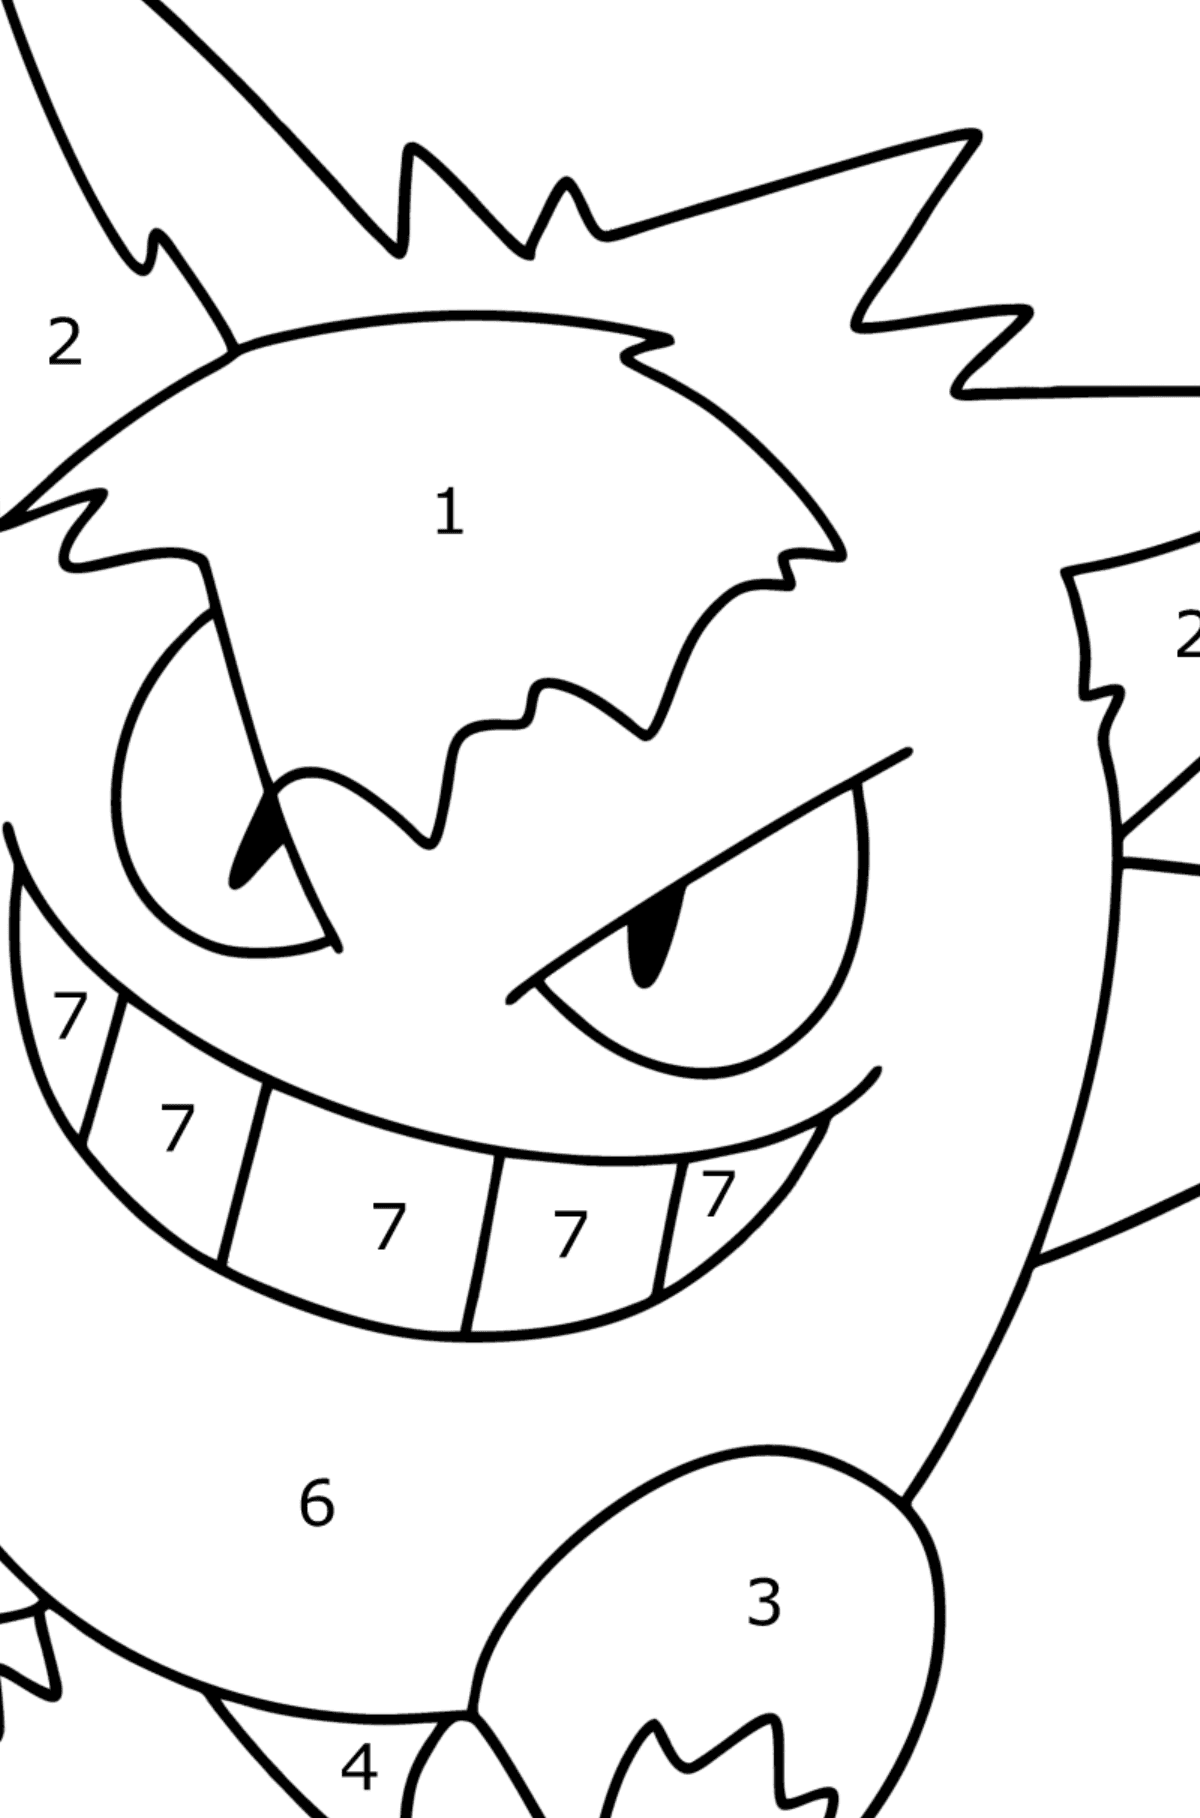 Pokémon Go Gengar coloring page - Coloring by Numbers for Kids